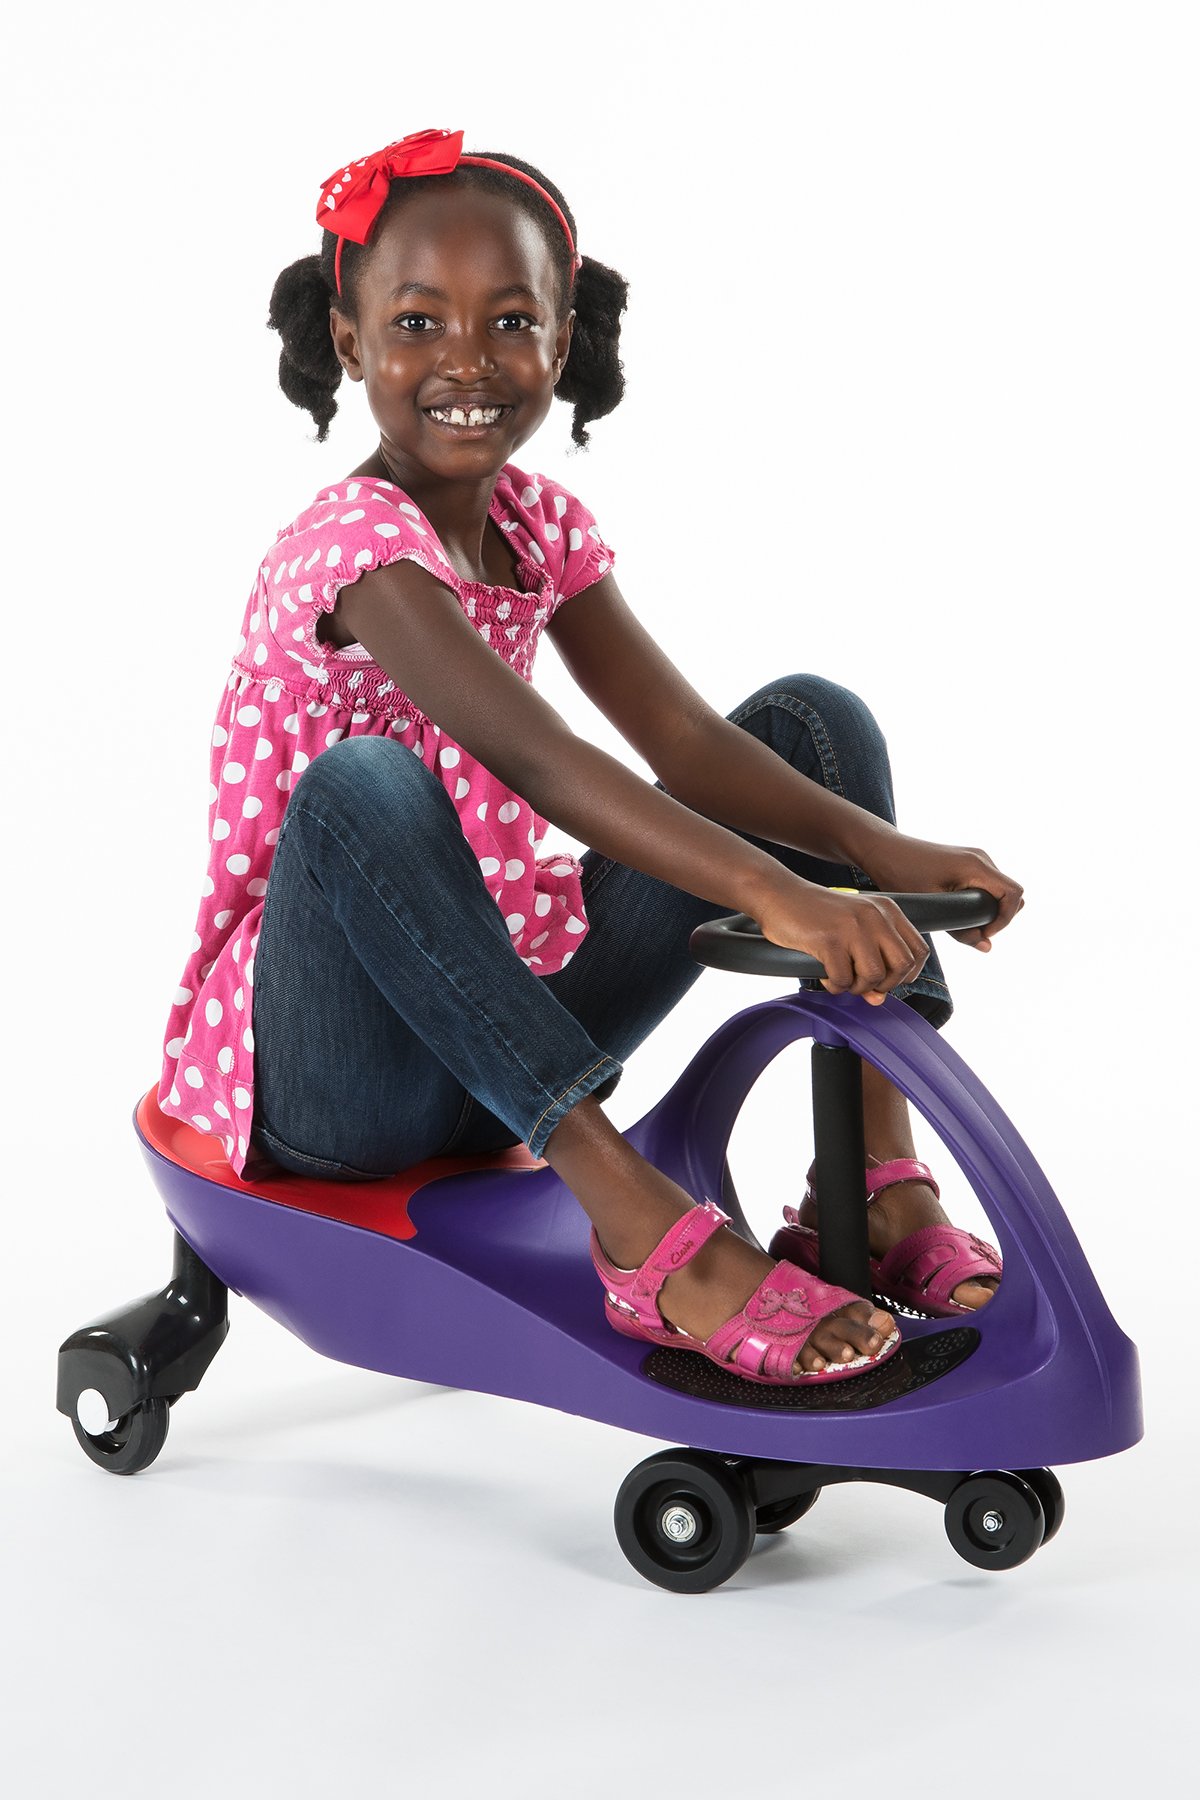 PlasmaCar The Original by PlaSmart – Purple – Ride On Toy, Ages 3 yrs and Up, No Batteries, Gears, or Pedals, Twist, Turn, Wiggle for Endless Fun